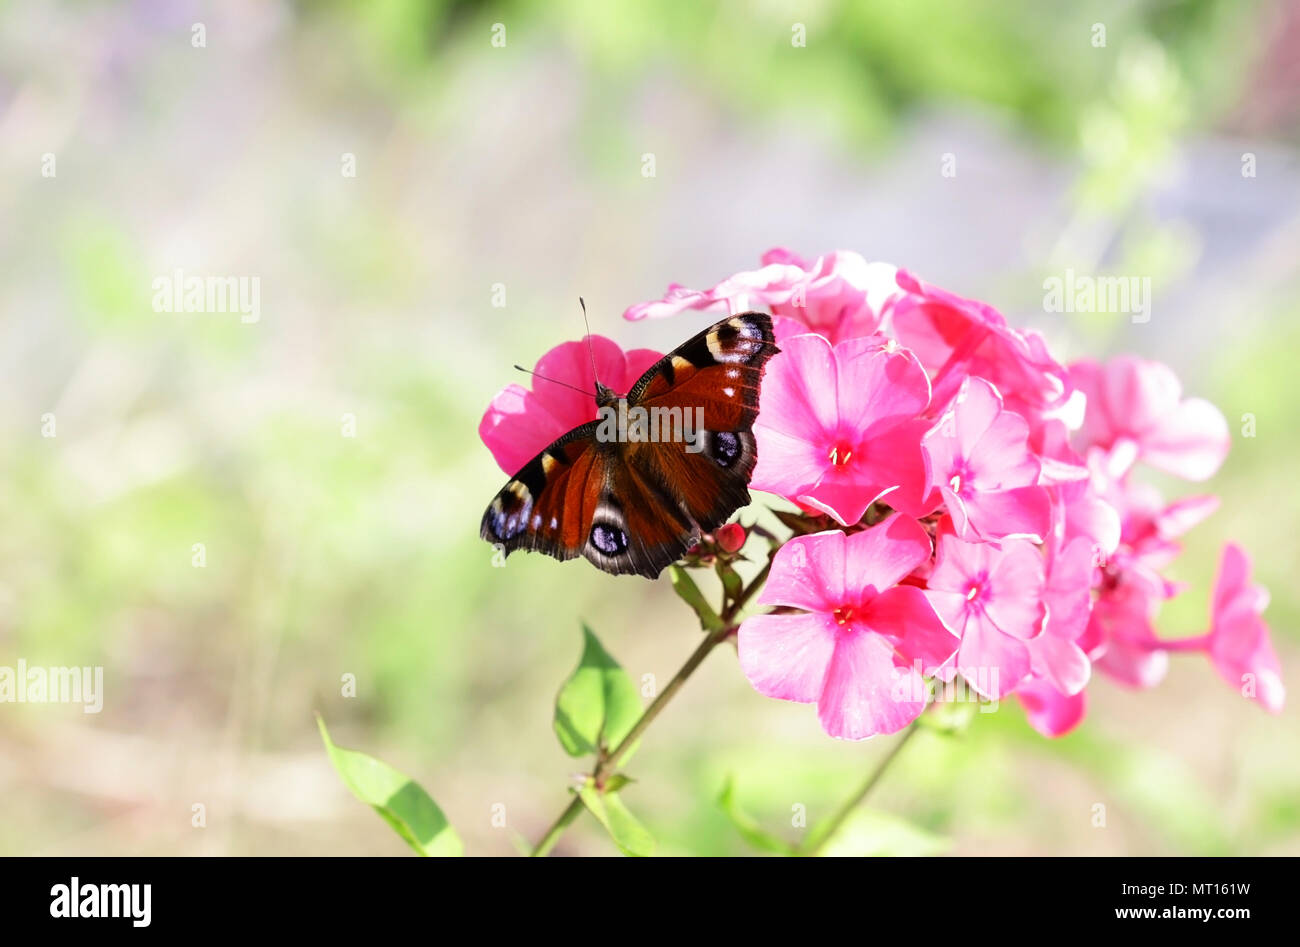 Butterfly on a phlox flower. Flower vegetable background horizontally Stock Photo